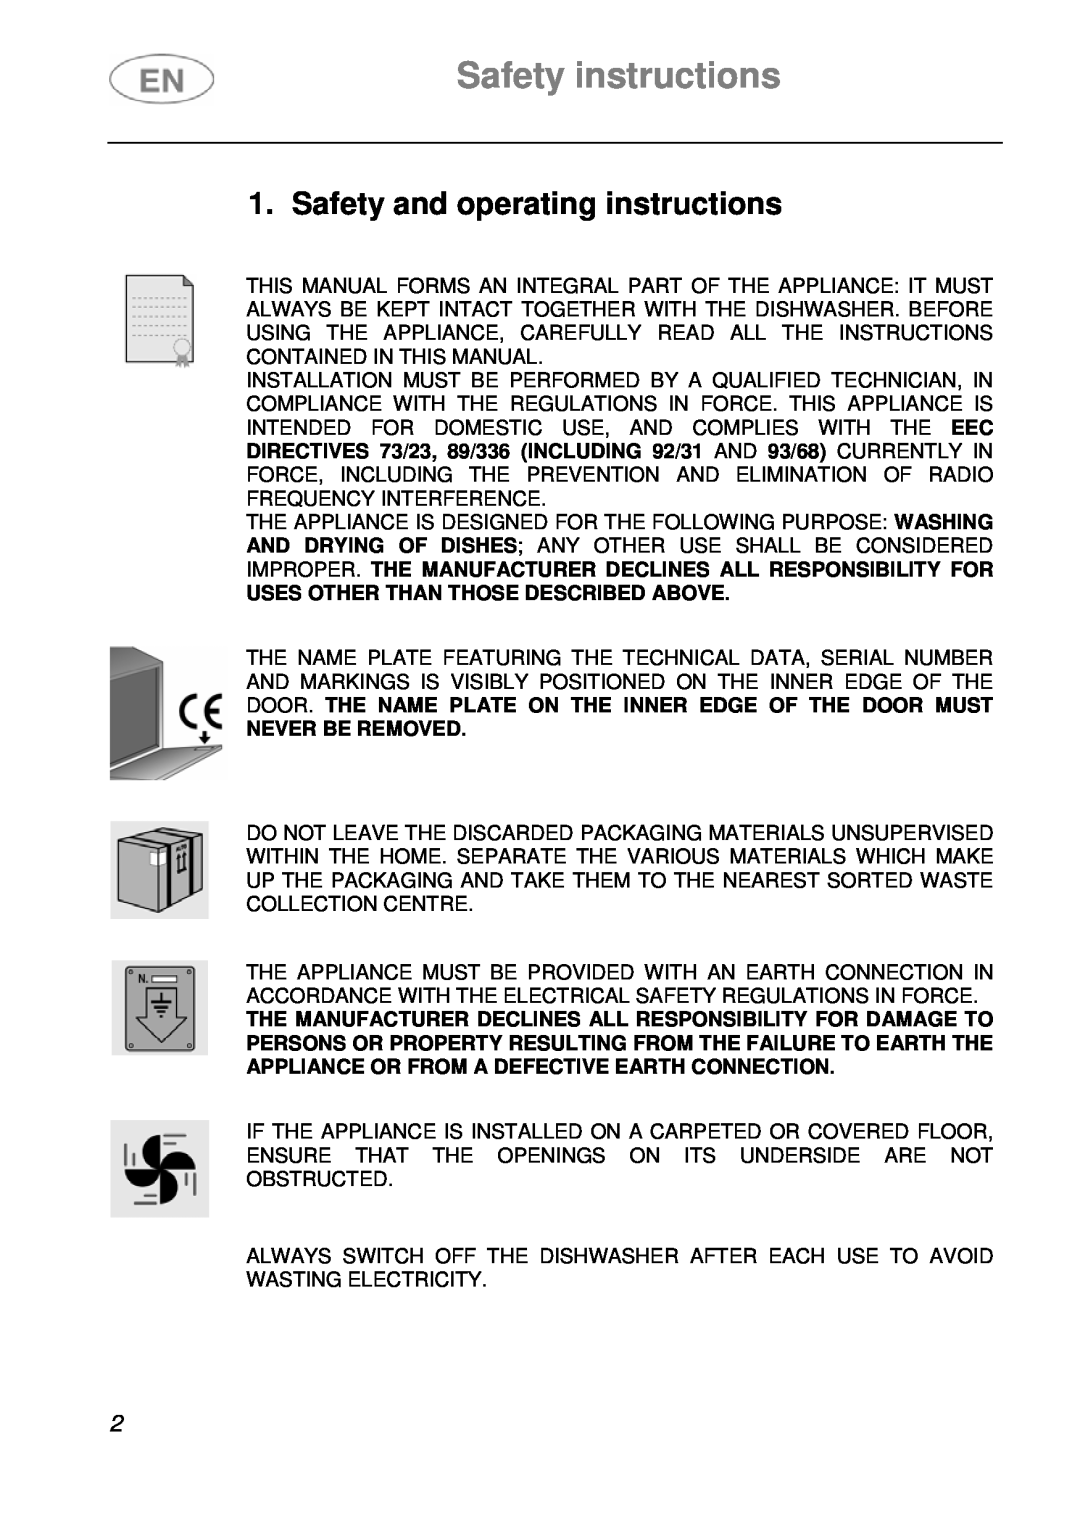 Smeg ST115S Safety instructions, Safety and operating instructions, Uses Other Than Those Described Above 